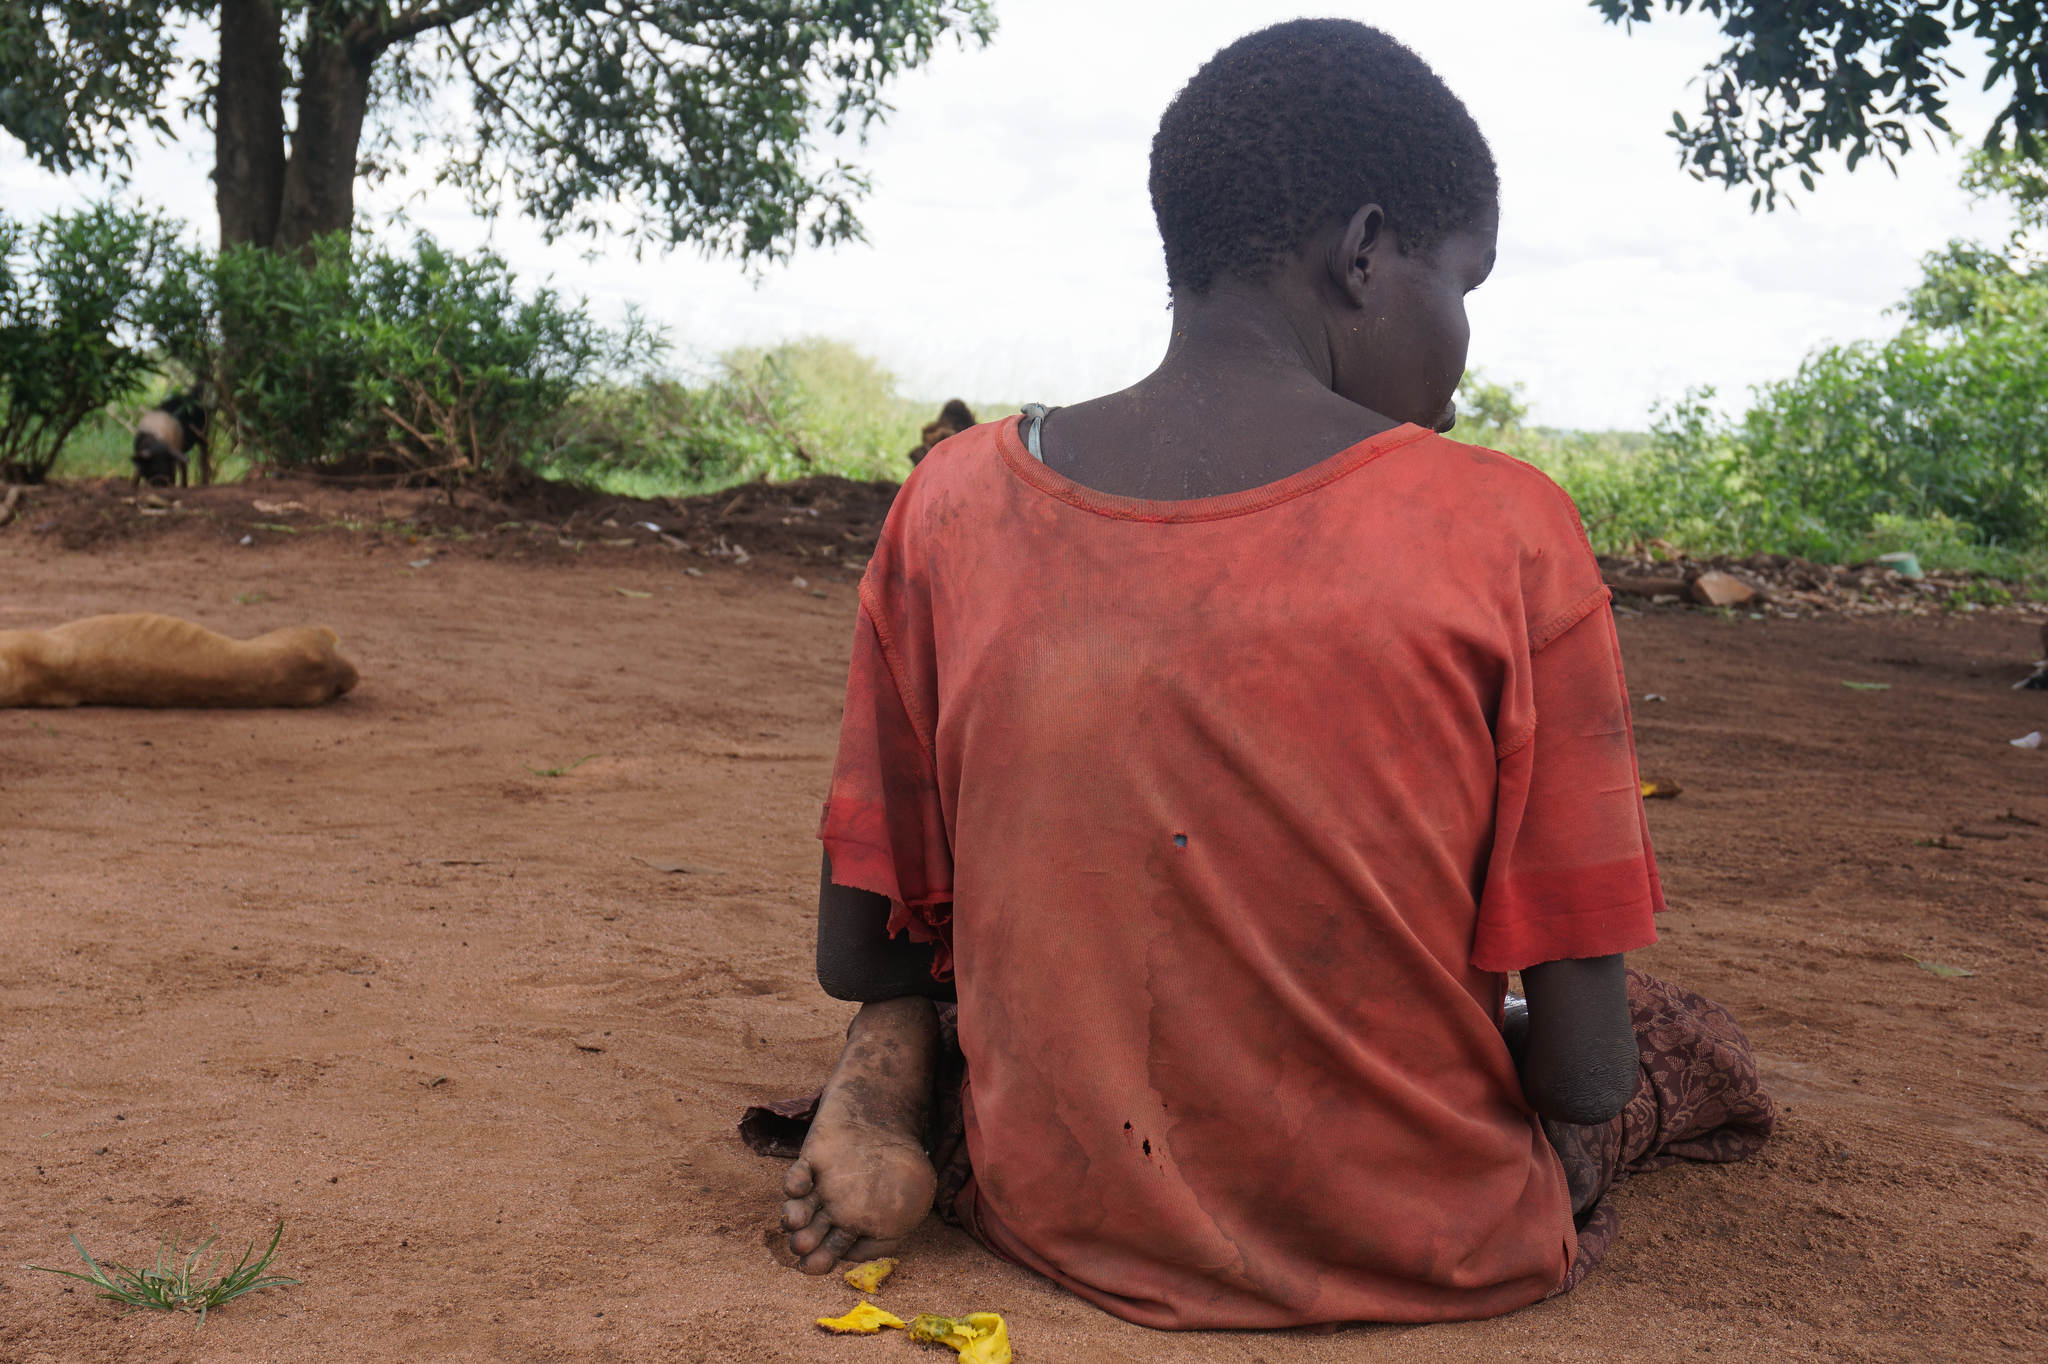 A ‘Mysterious Tropical Disorder’ Is Devastating Families in Northern Uganda